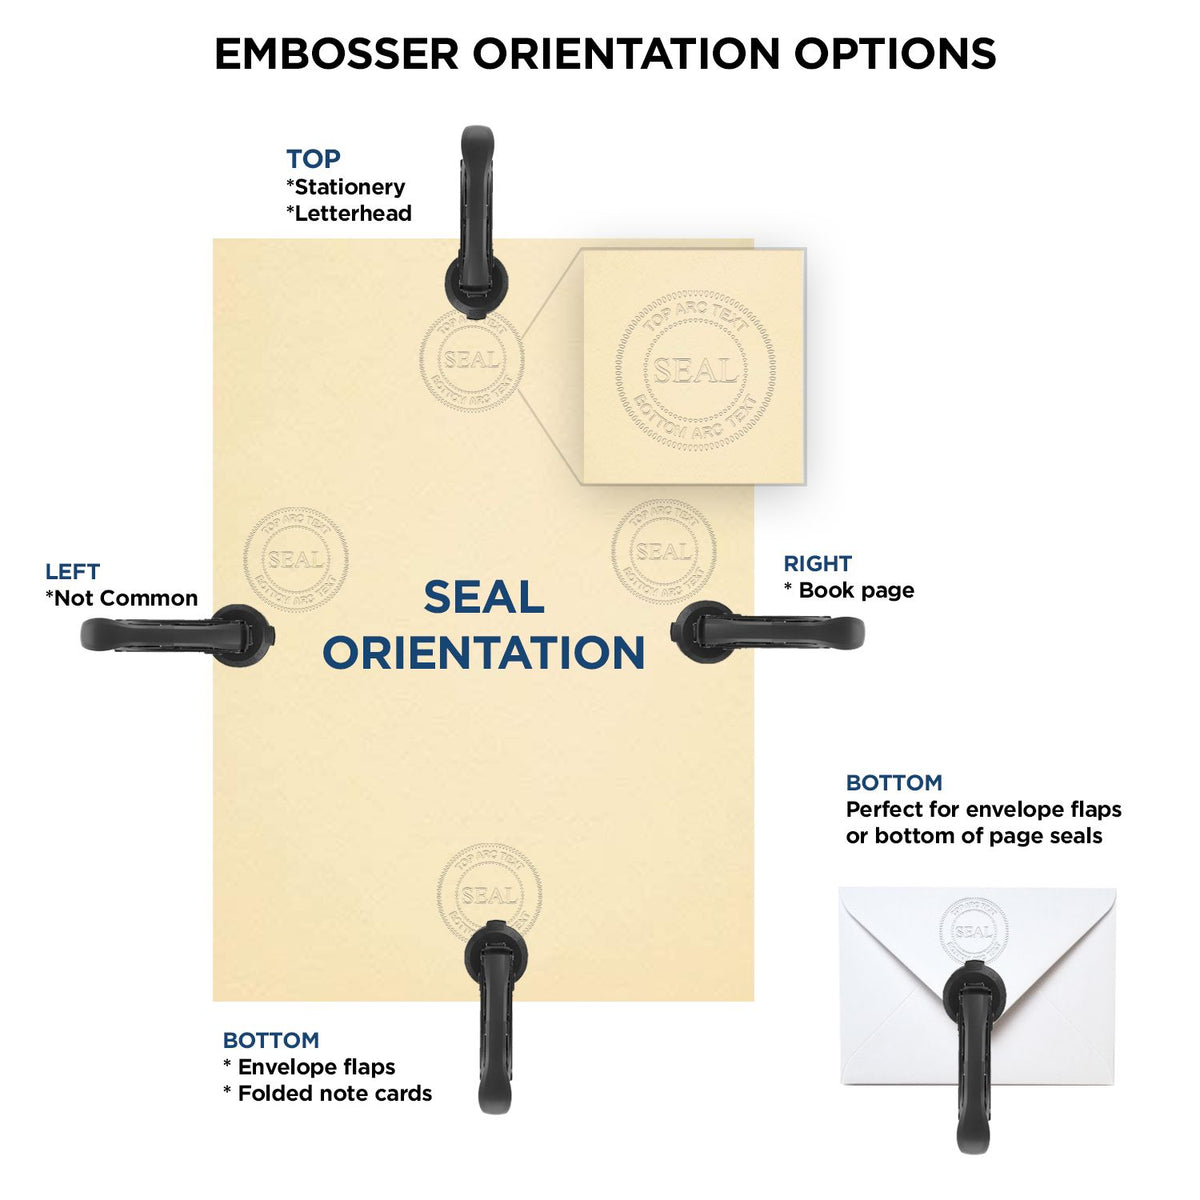 An infographic for the Handheld Georgia Professional Geologist Embosser showing embosser orientation, this is showing examples of a top, bottom, right and left insert.